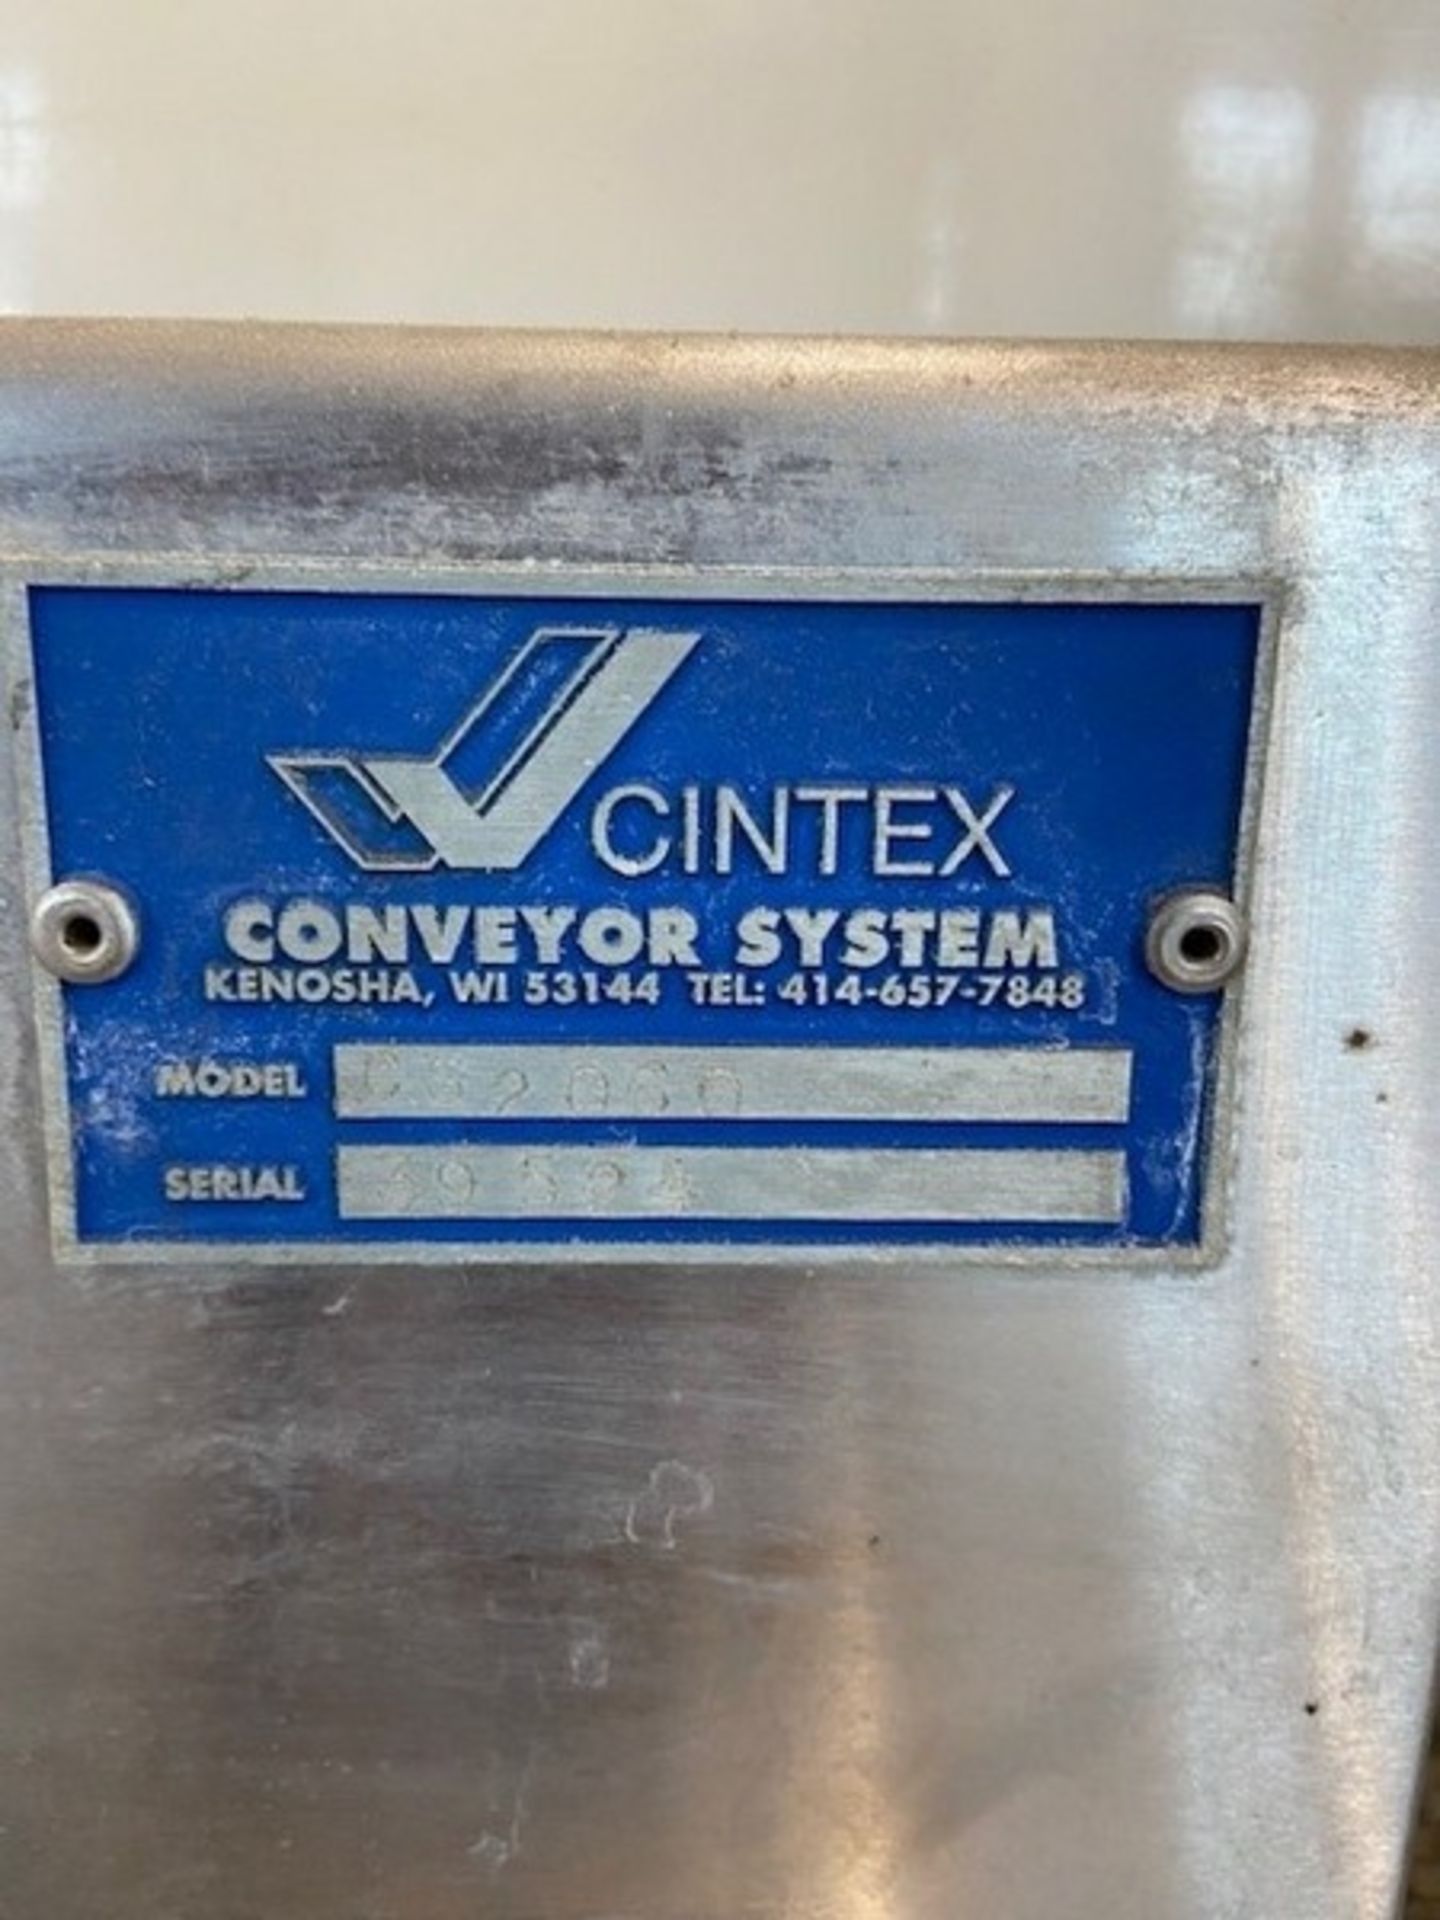 Cintex Metal Detector, M/N CS2050, S/N 39524, with Aprox. 9" W x 5" H x 12" D, with Aprox. 8" W - Image 3 of 8